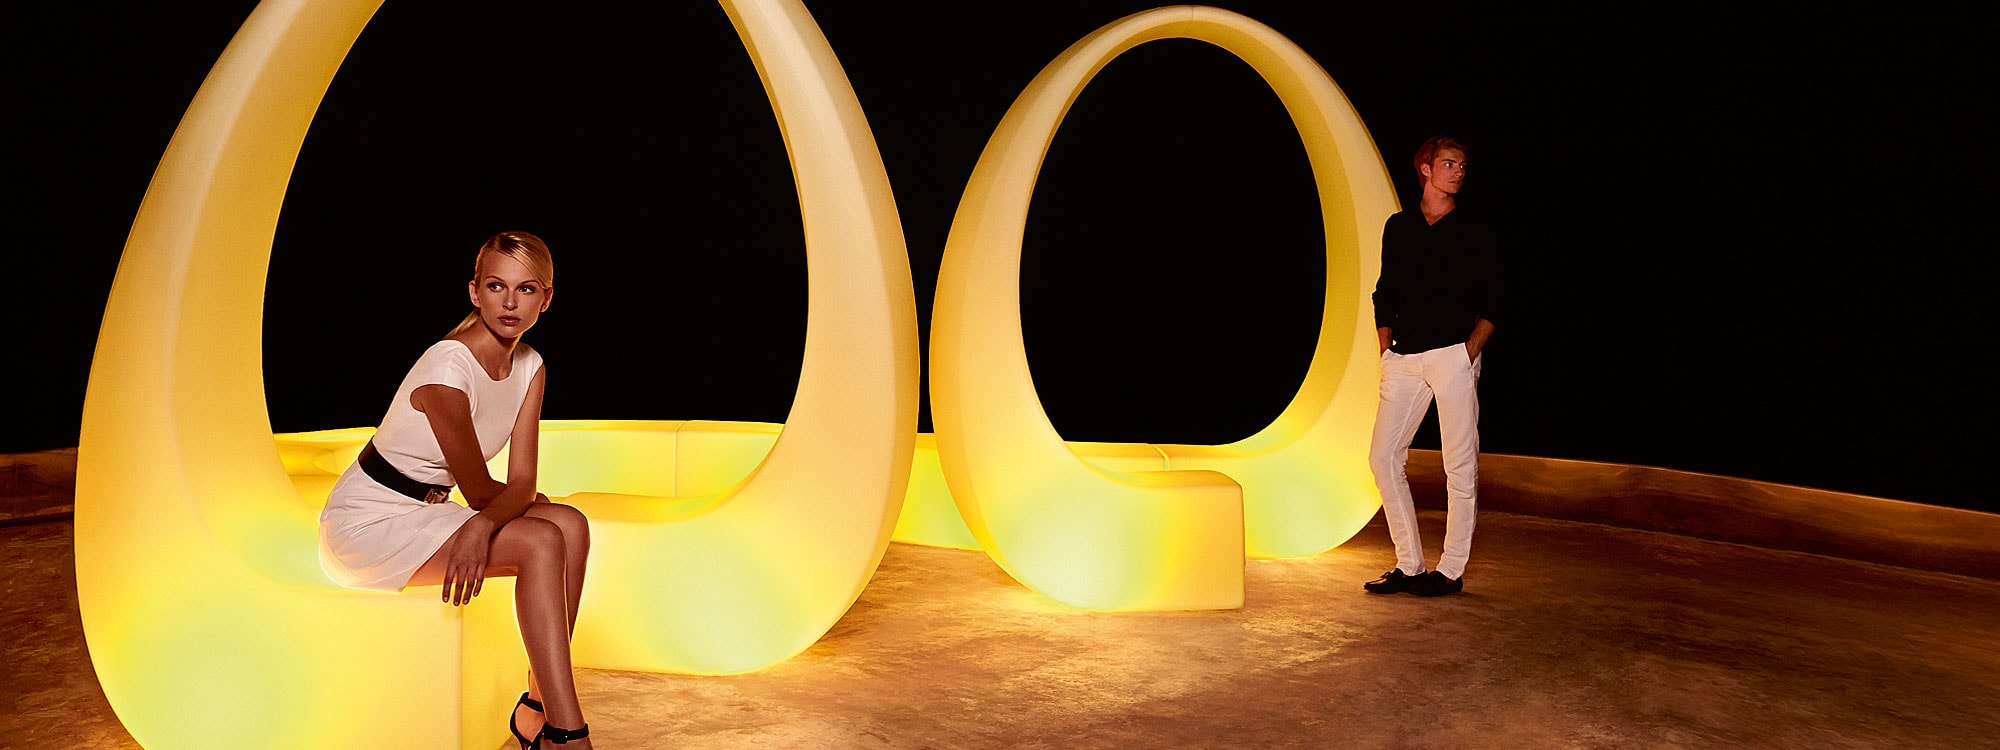 Nighttime image of illuminated Vondom AND modular bench with spatial design evocative of spinning DNA helix